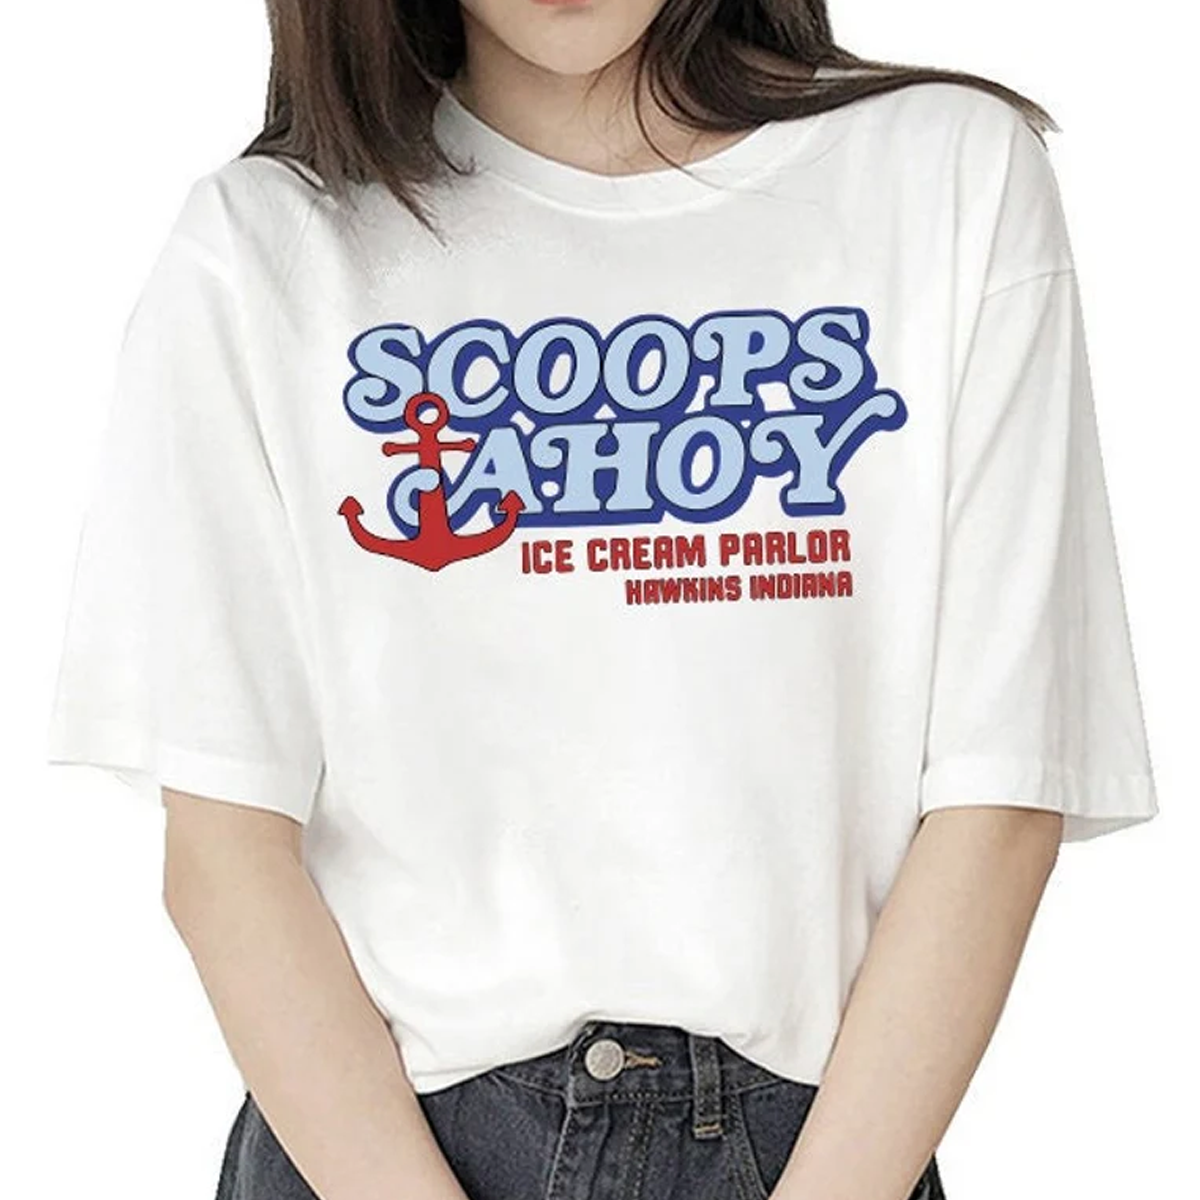 Scoops Ahoy White T-Shirt